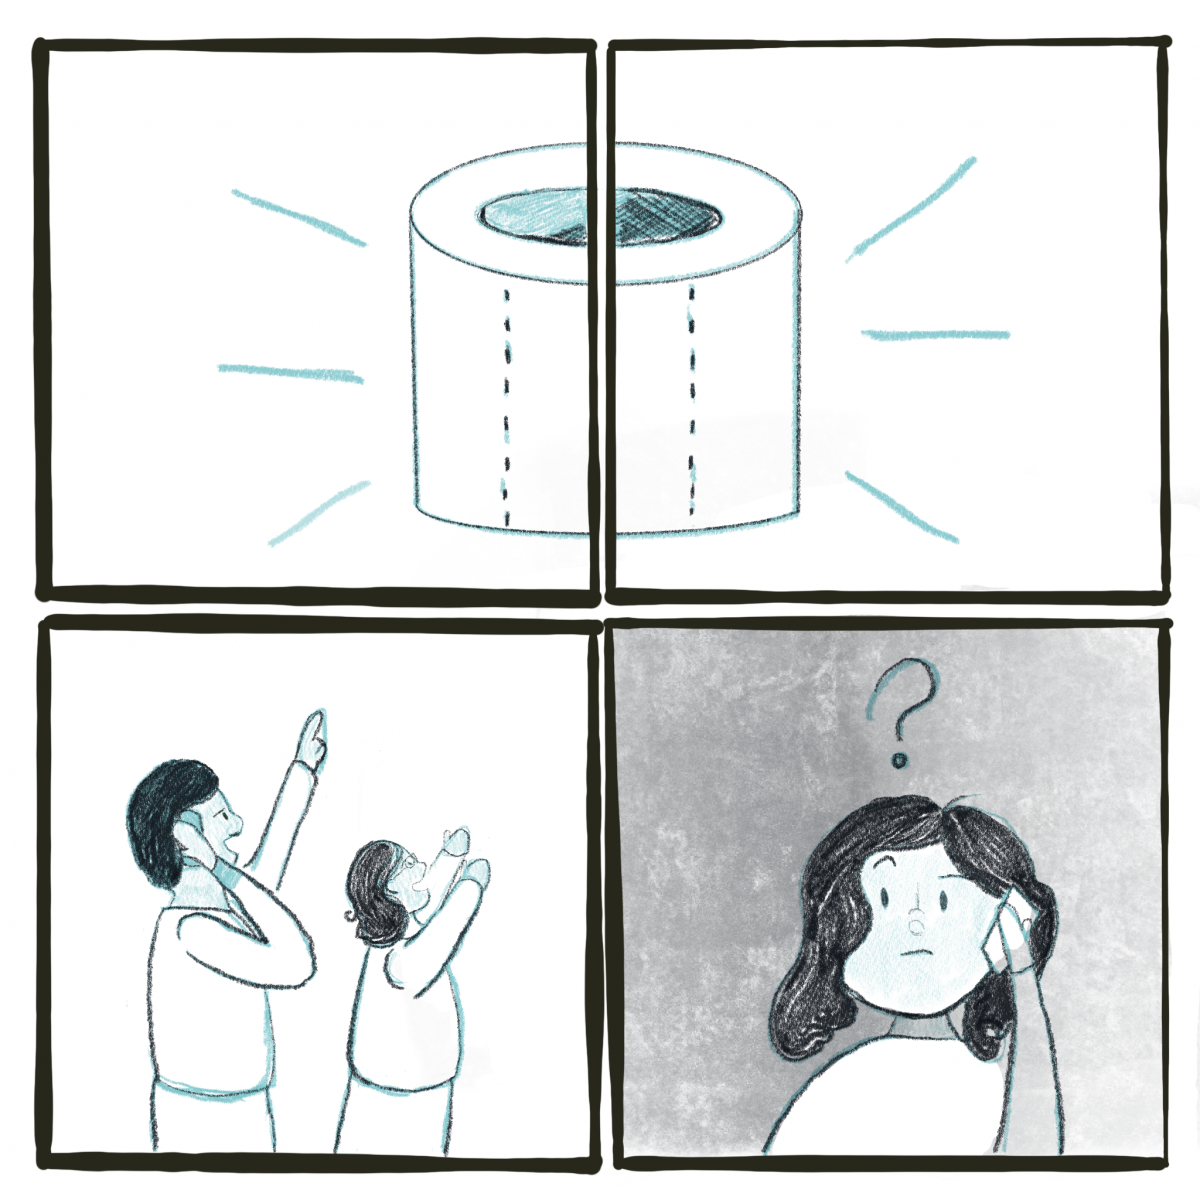 Illustration of four squares frames. Top two squares show a roll of toilet paper. Bottom left frame shows two persons pointing up at the toilet paper. Bottom right frame shows a confused person.